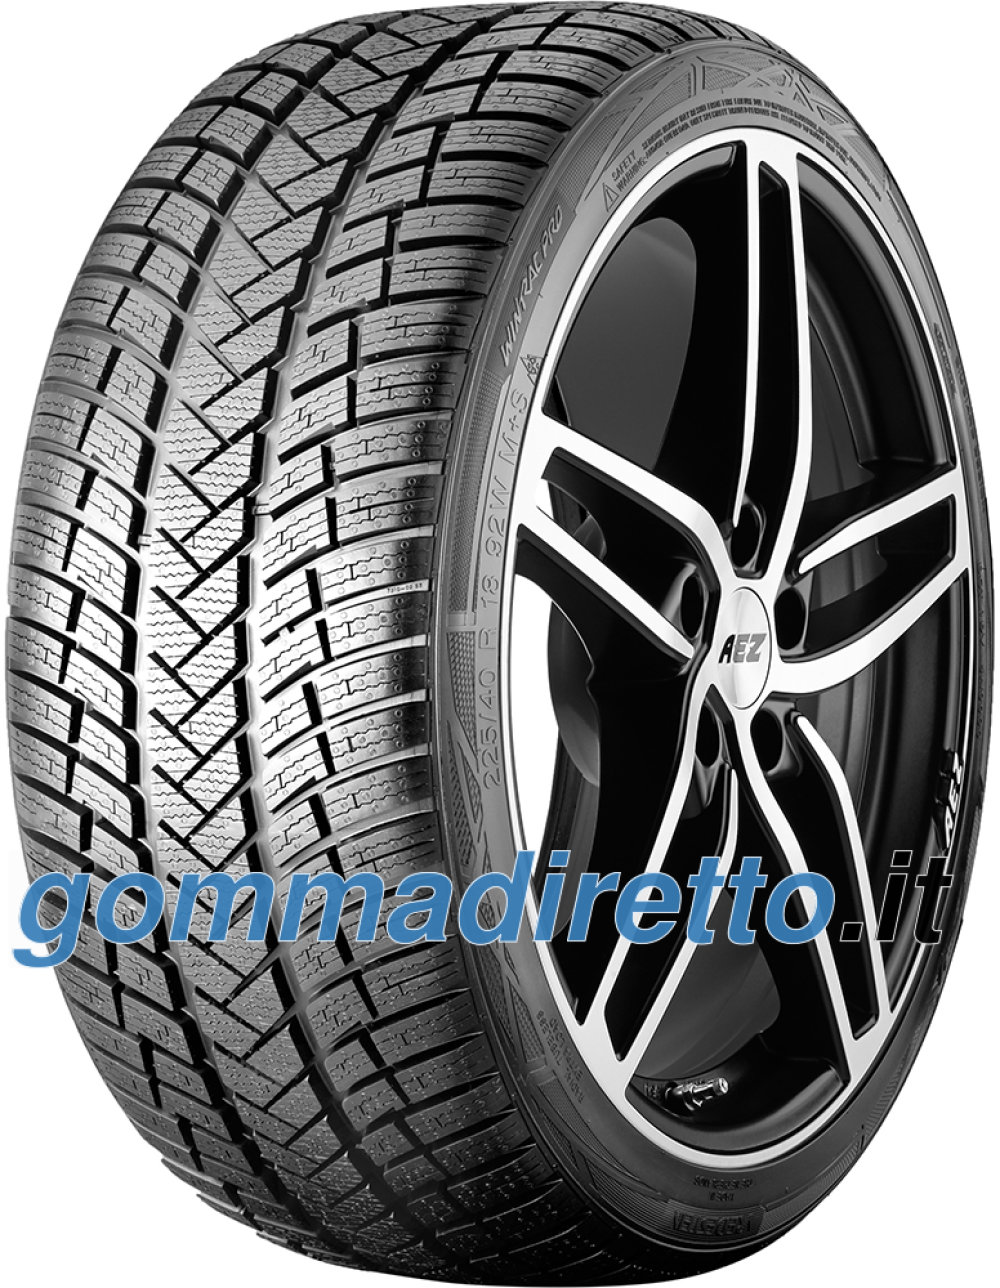 Image of Vredestein Wintrac Pro ( 225/50 R17 98H XL )